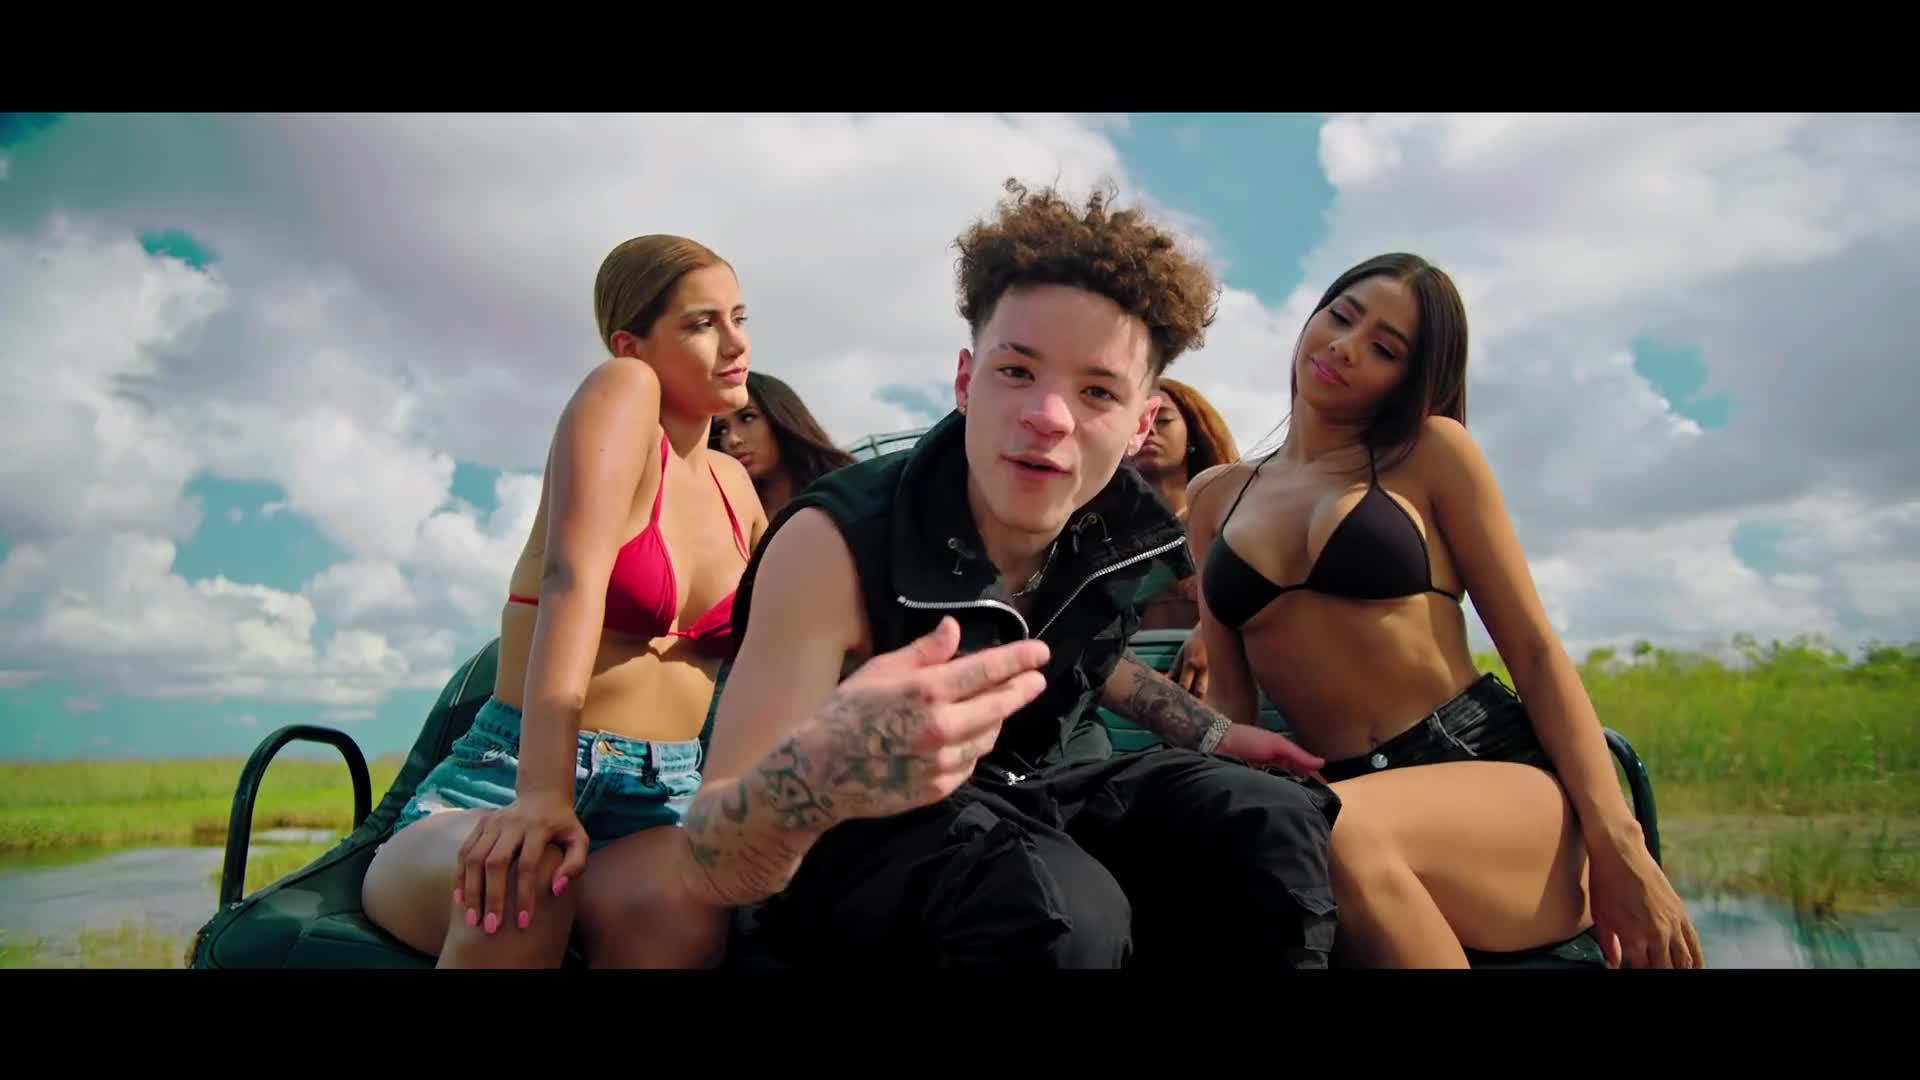 Lil Mosey - Live This Wild